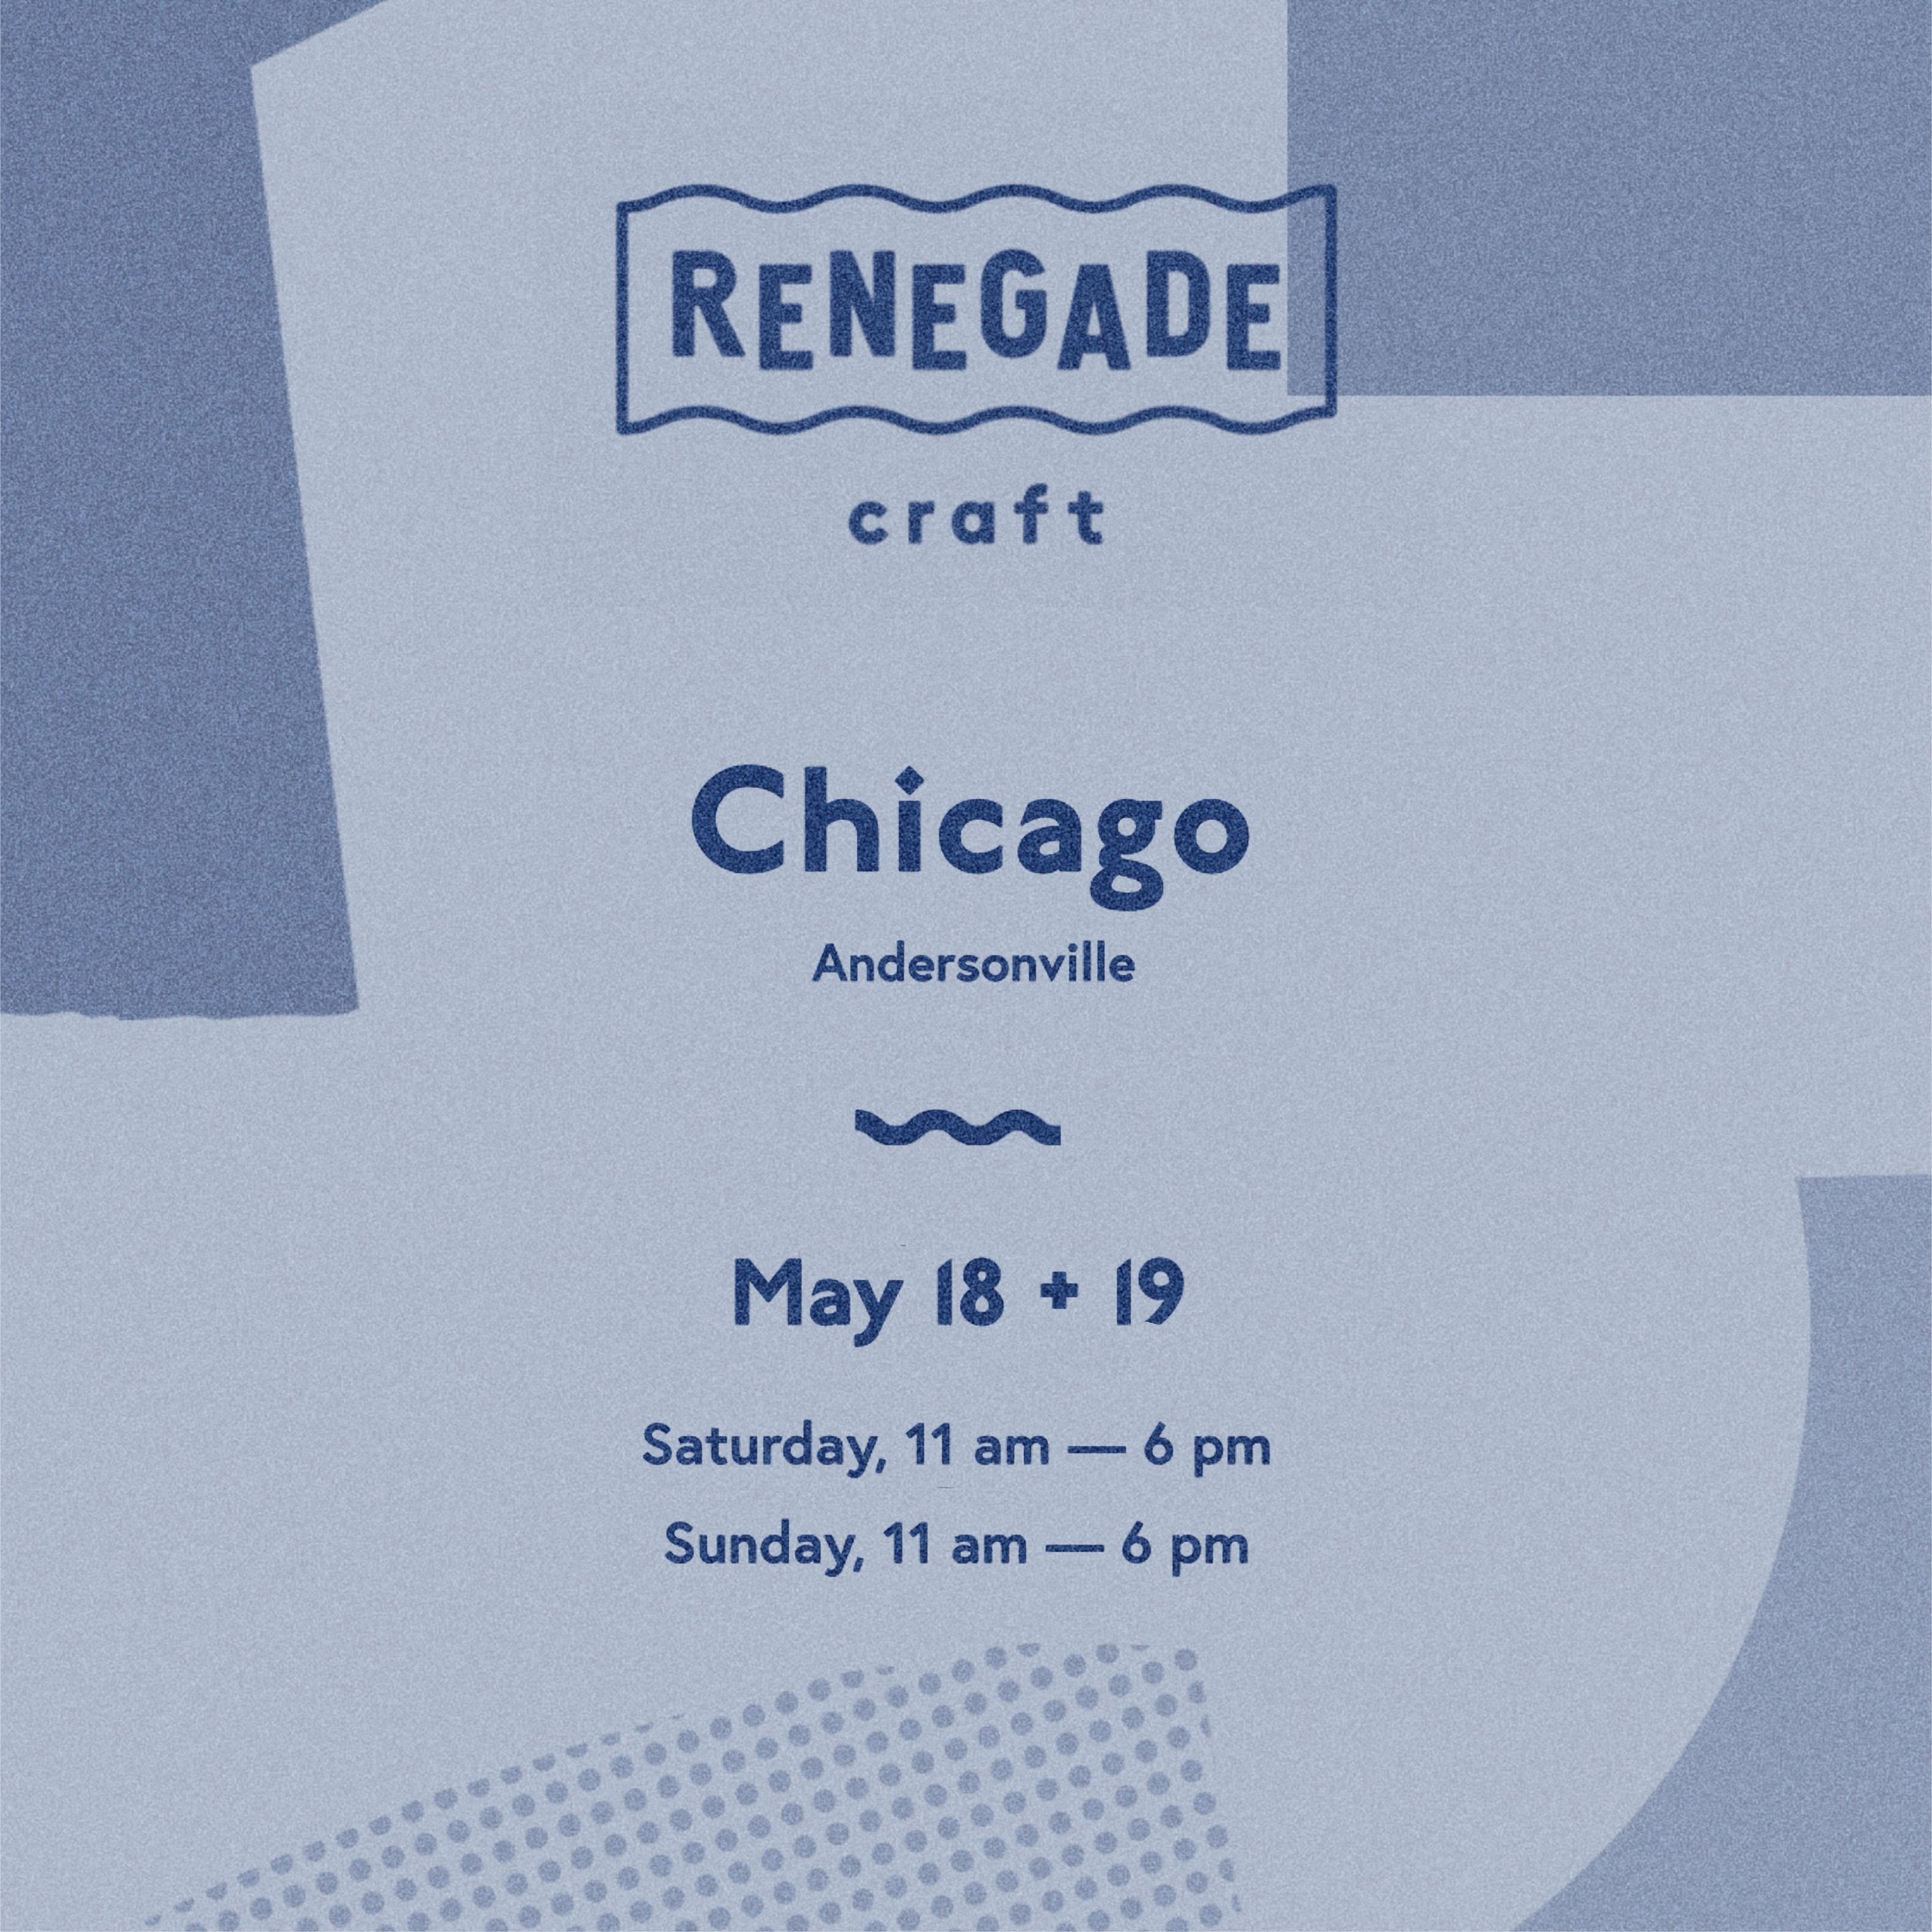 Find Manual al fresco at @renegadecraft in Chicago&rsquo;s Andersonville neighborhood May 18-19. In addition our glassware line, I&rsquo;m aiming to have some new products on display as well. I&rsquo;ll be trying something different with &ldquo;shopp